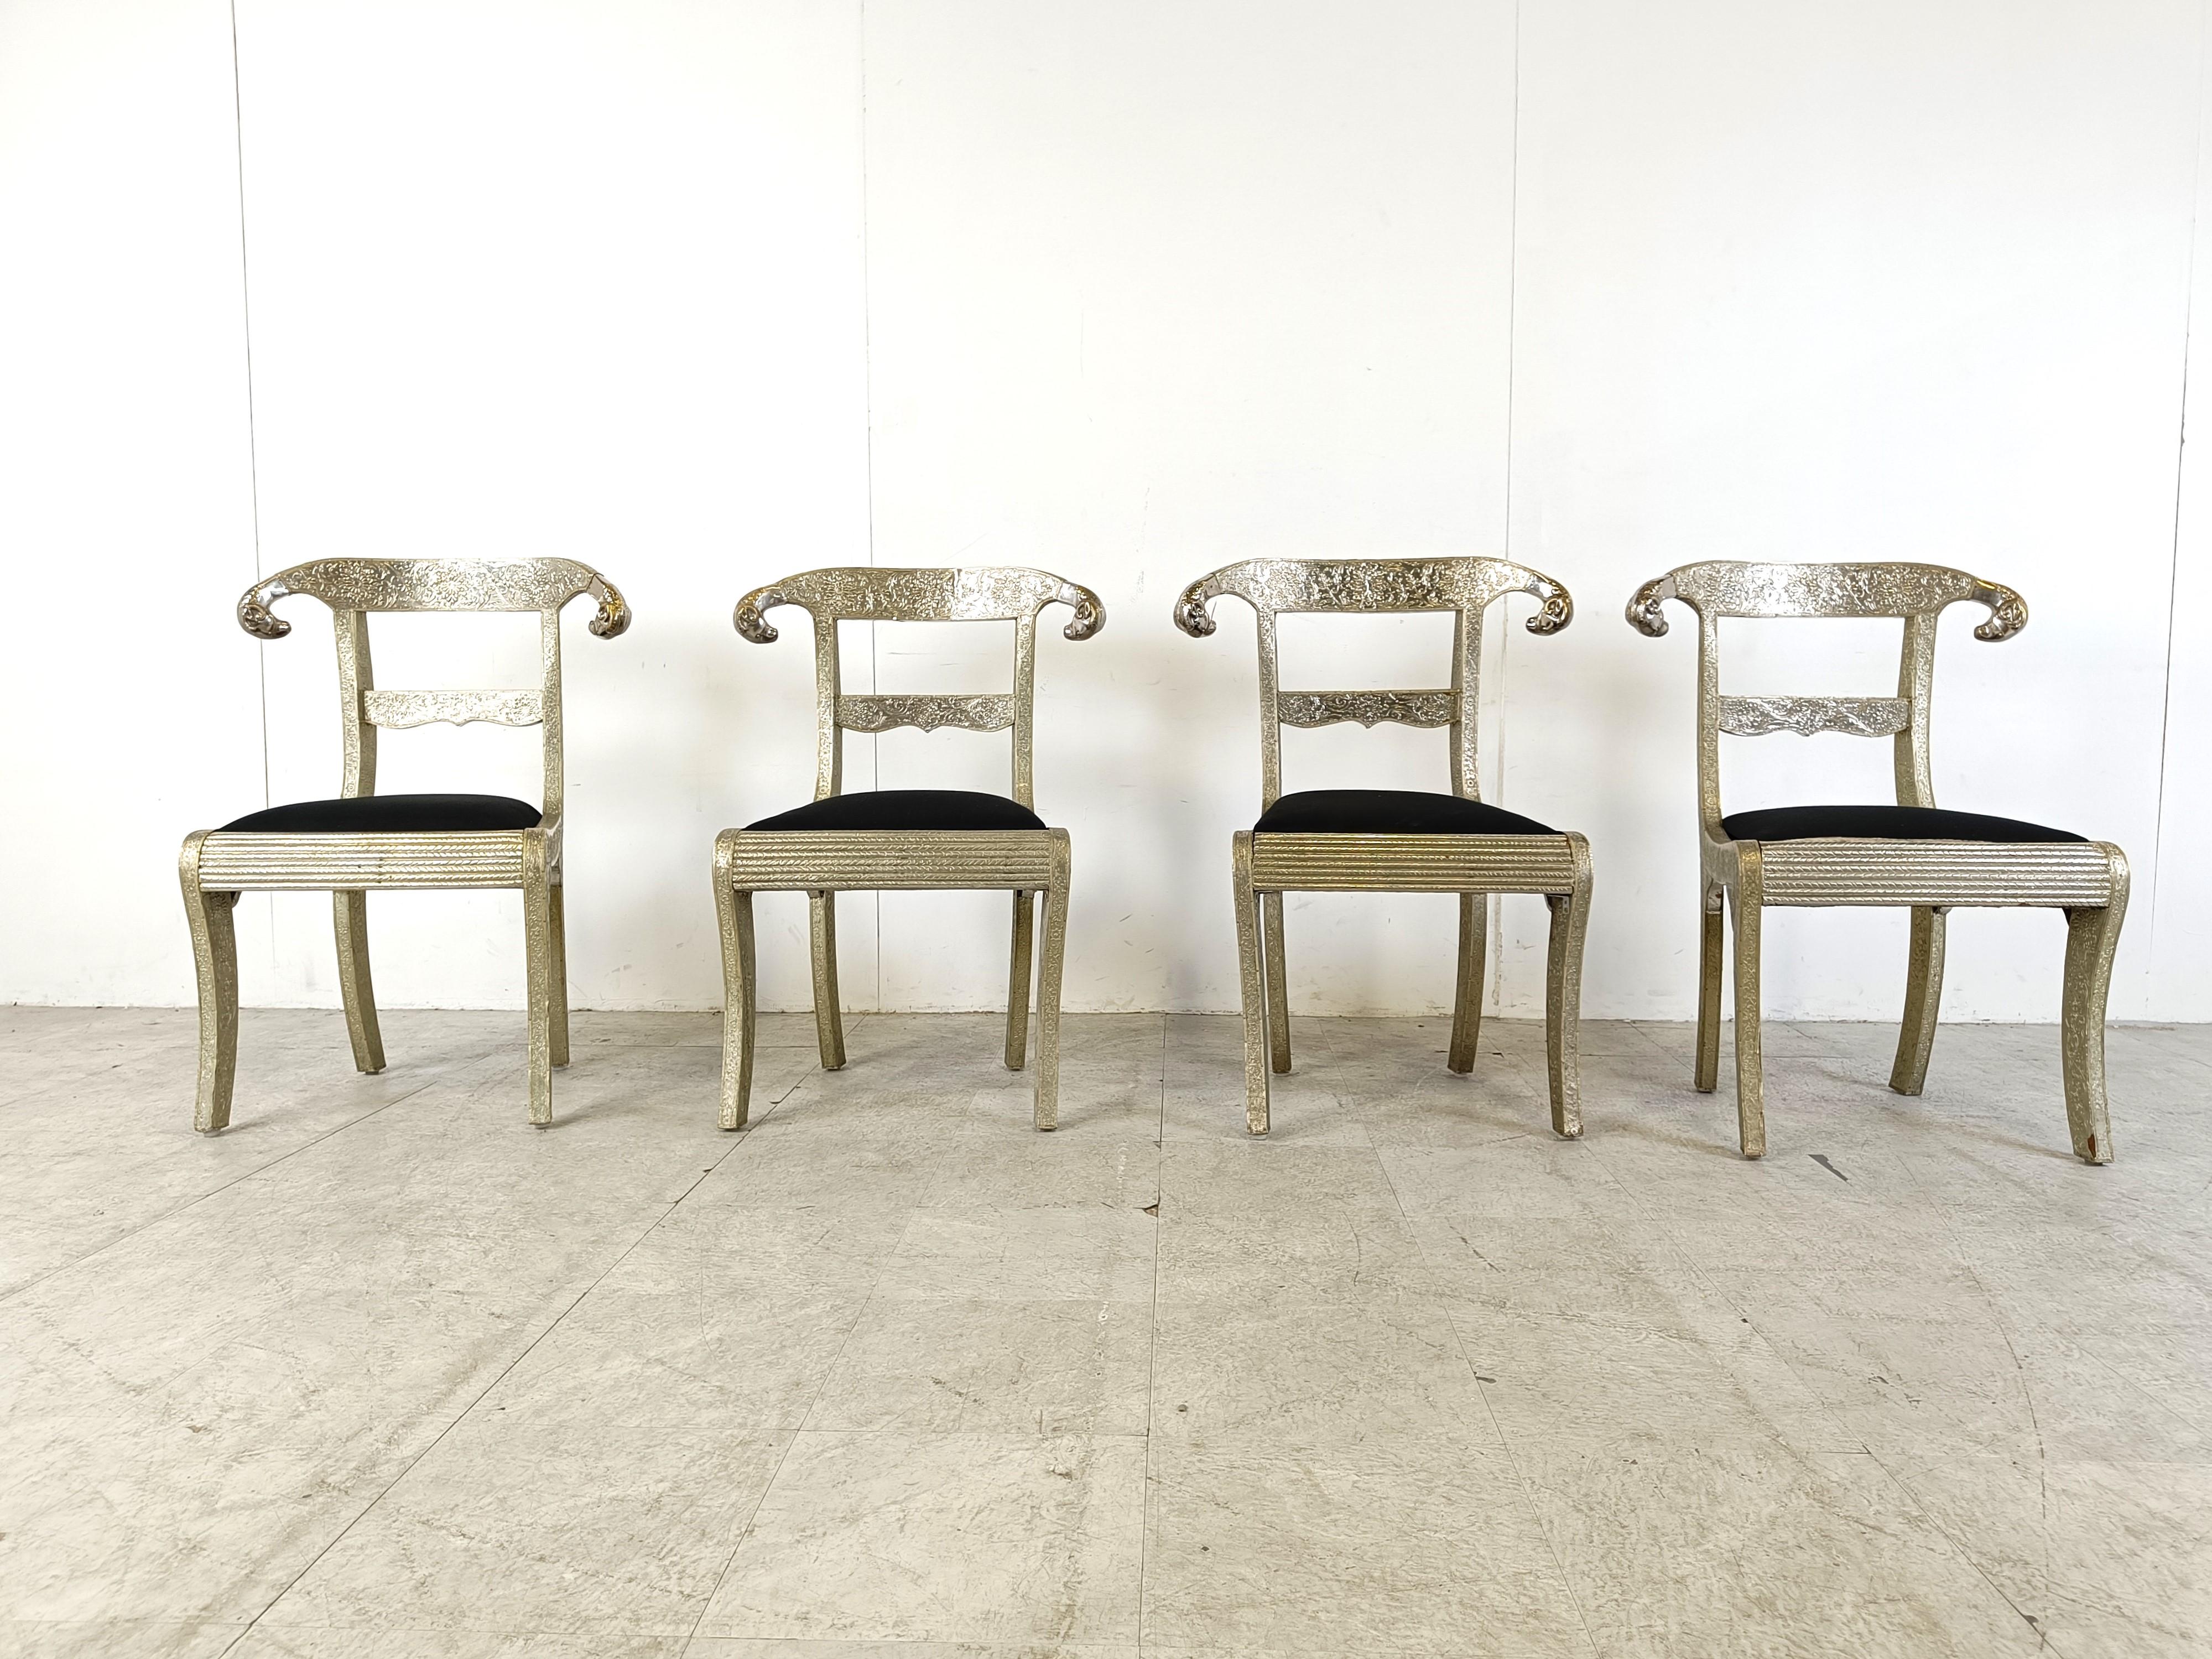 Mid-20th Century Anglo-Indian silvered dowry chairs, 1950s For Sale